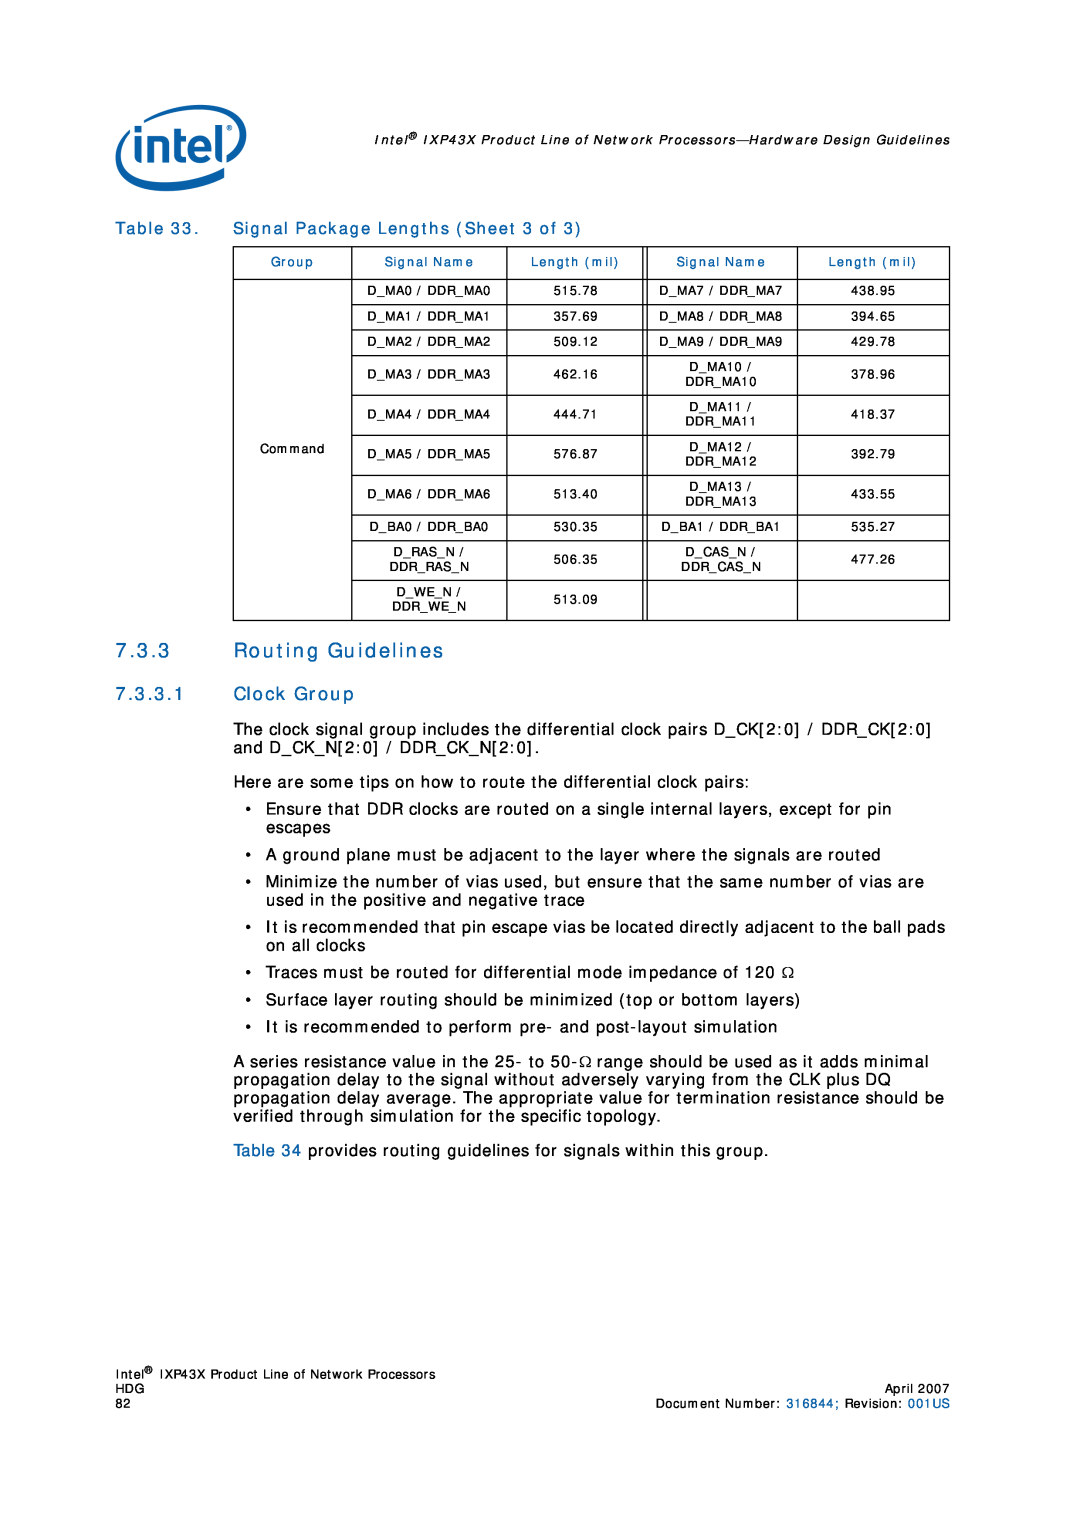 Intel IXP43X manual Routing Guidelines, Clock Group, Signal Package Lengths Sheet 3 of 